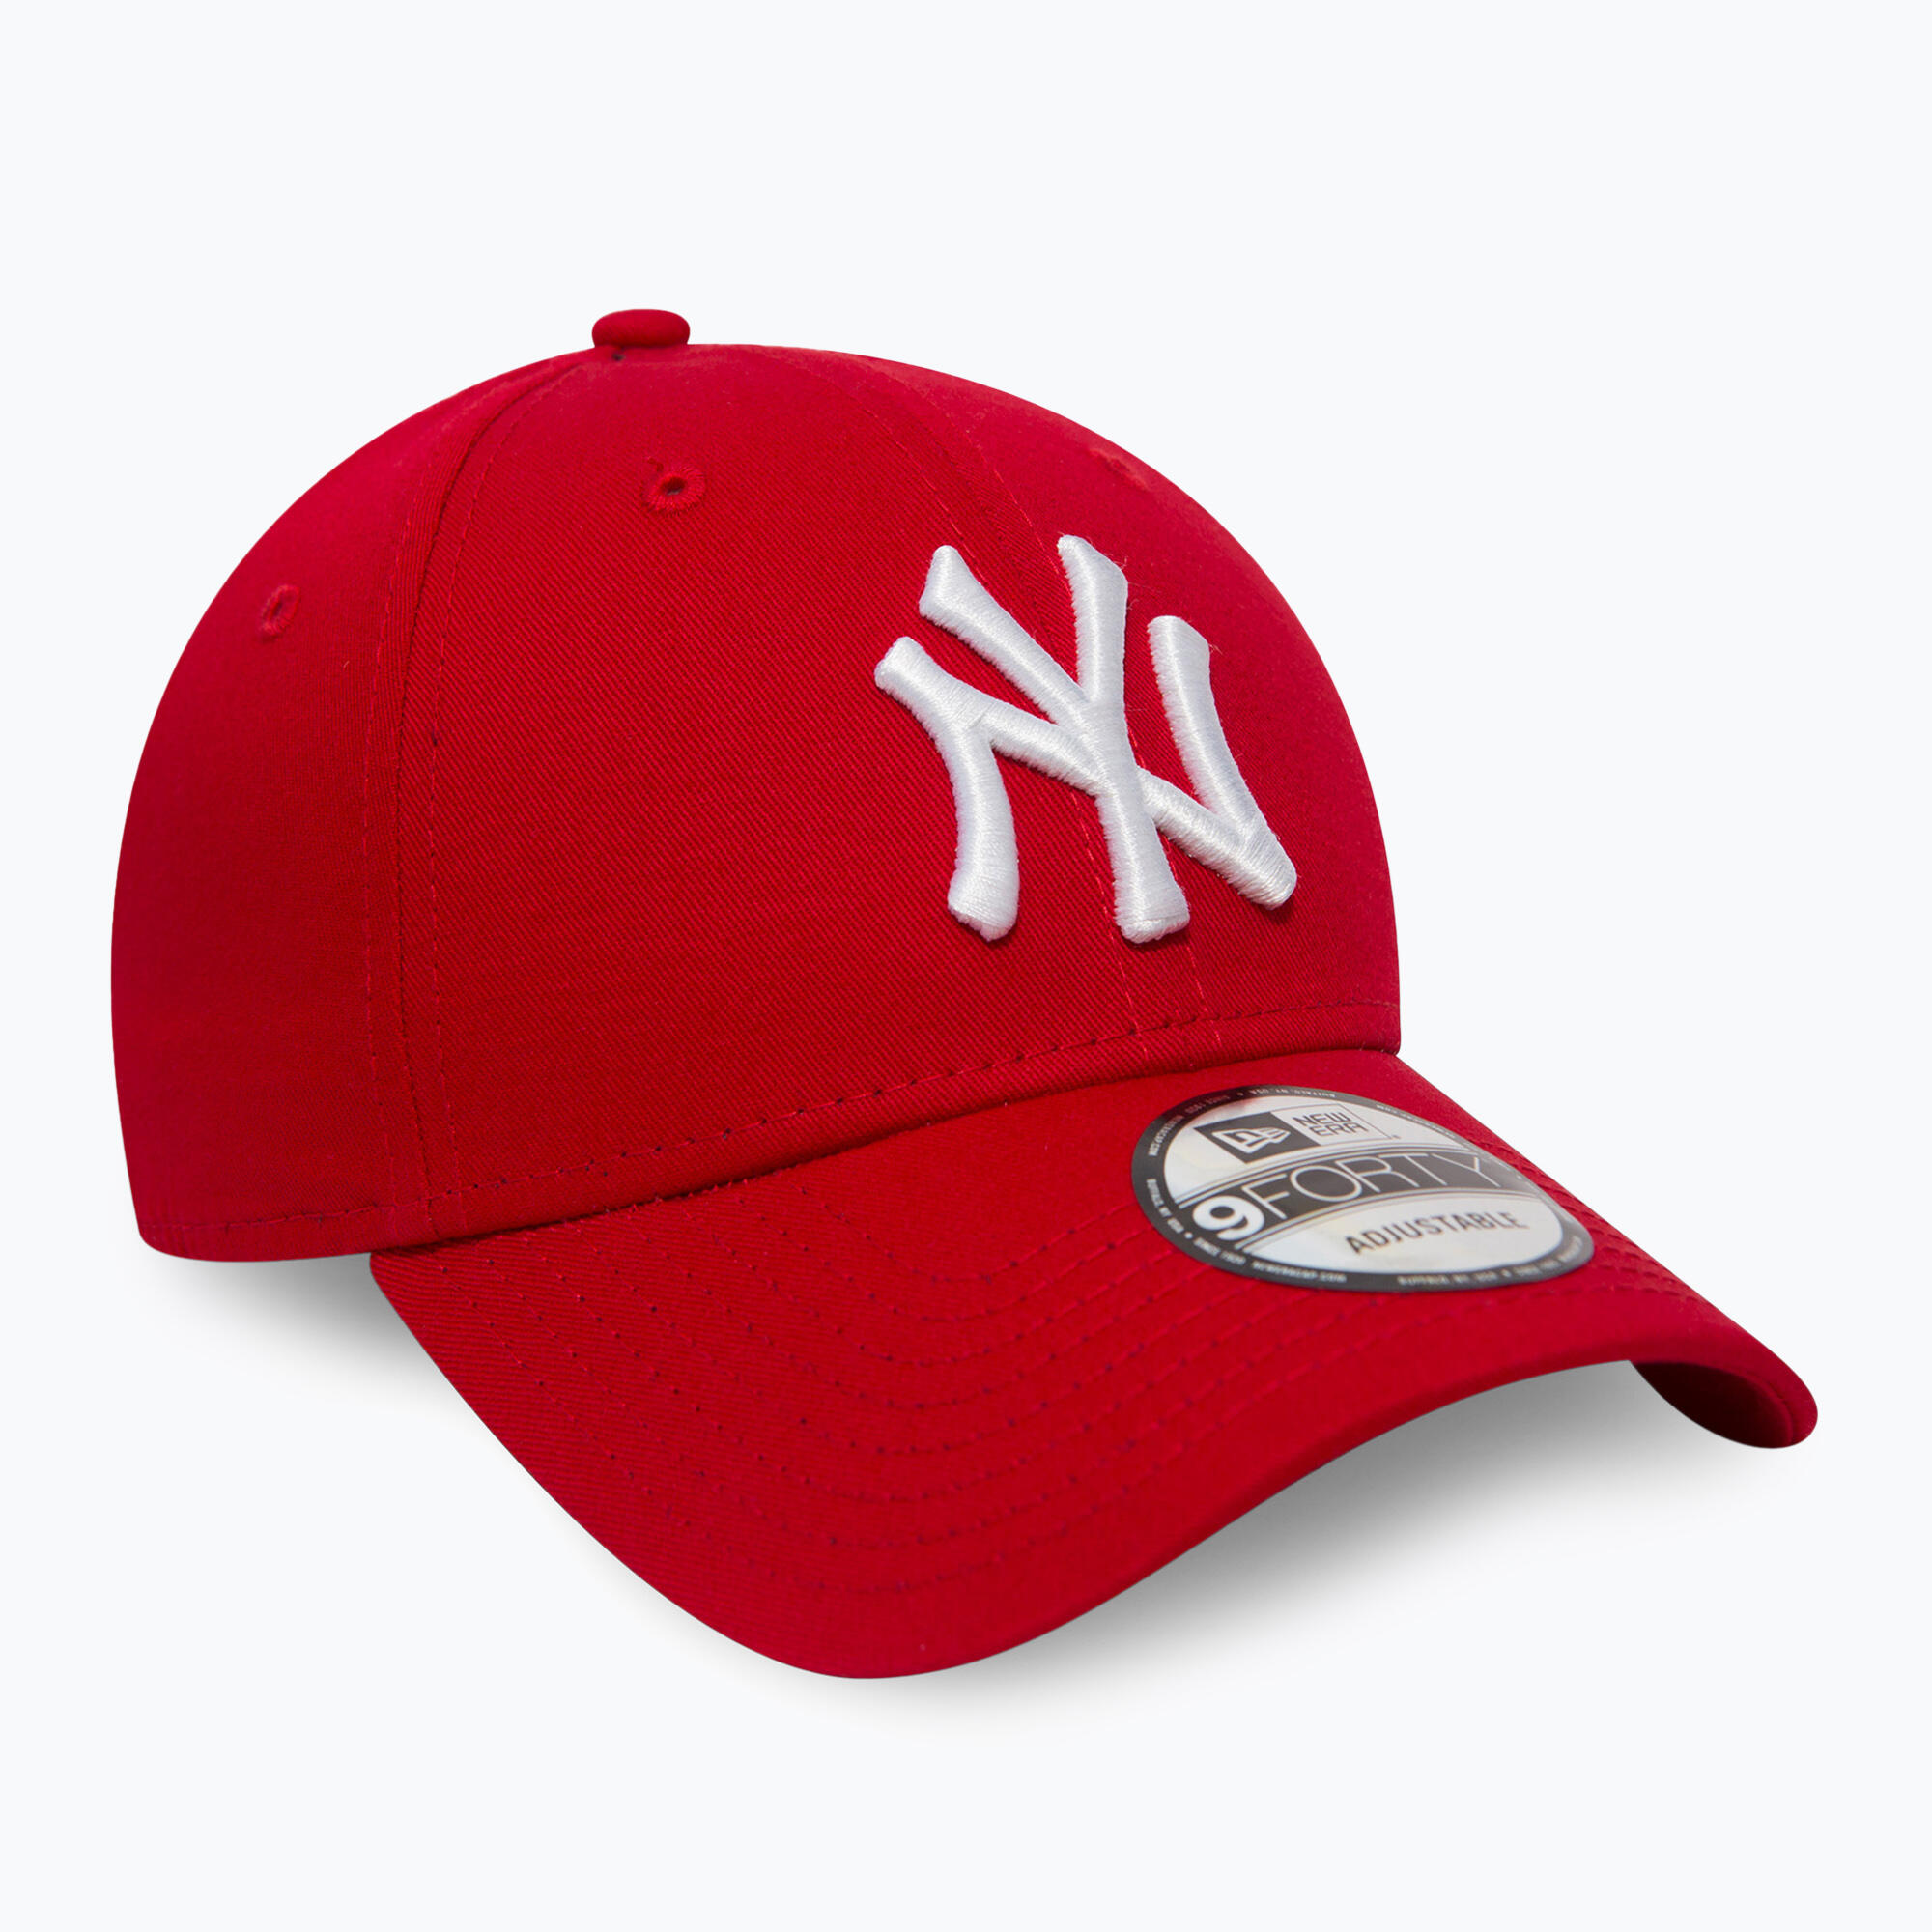 New Era NY Yankees Essential 9Forty Cap - Red 4/4